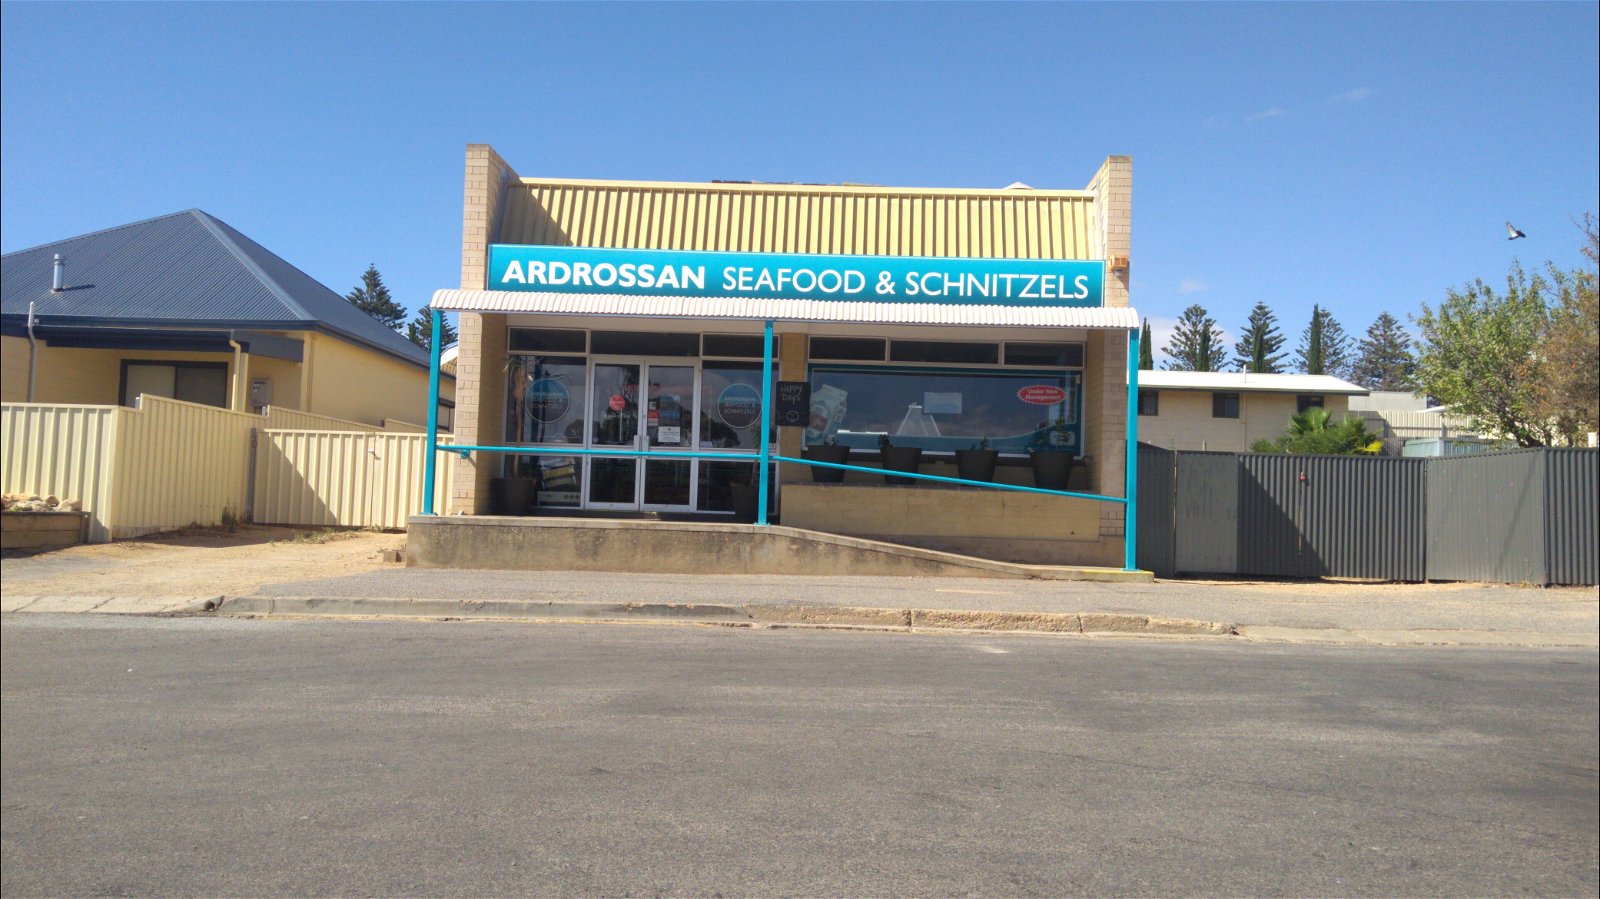 Ardrossan Seafood and Schnitzels - Surfers Paradise Gold Coast